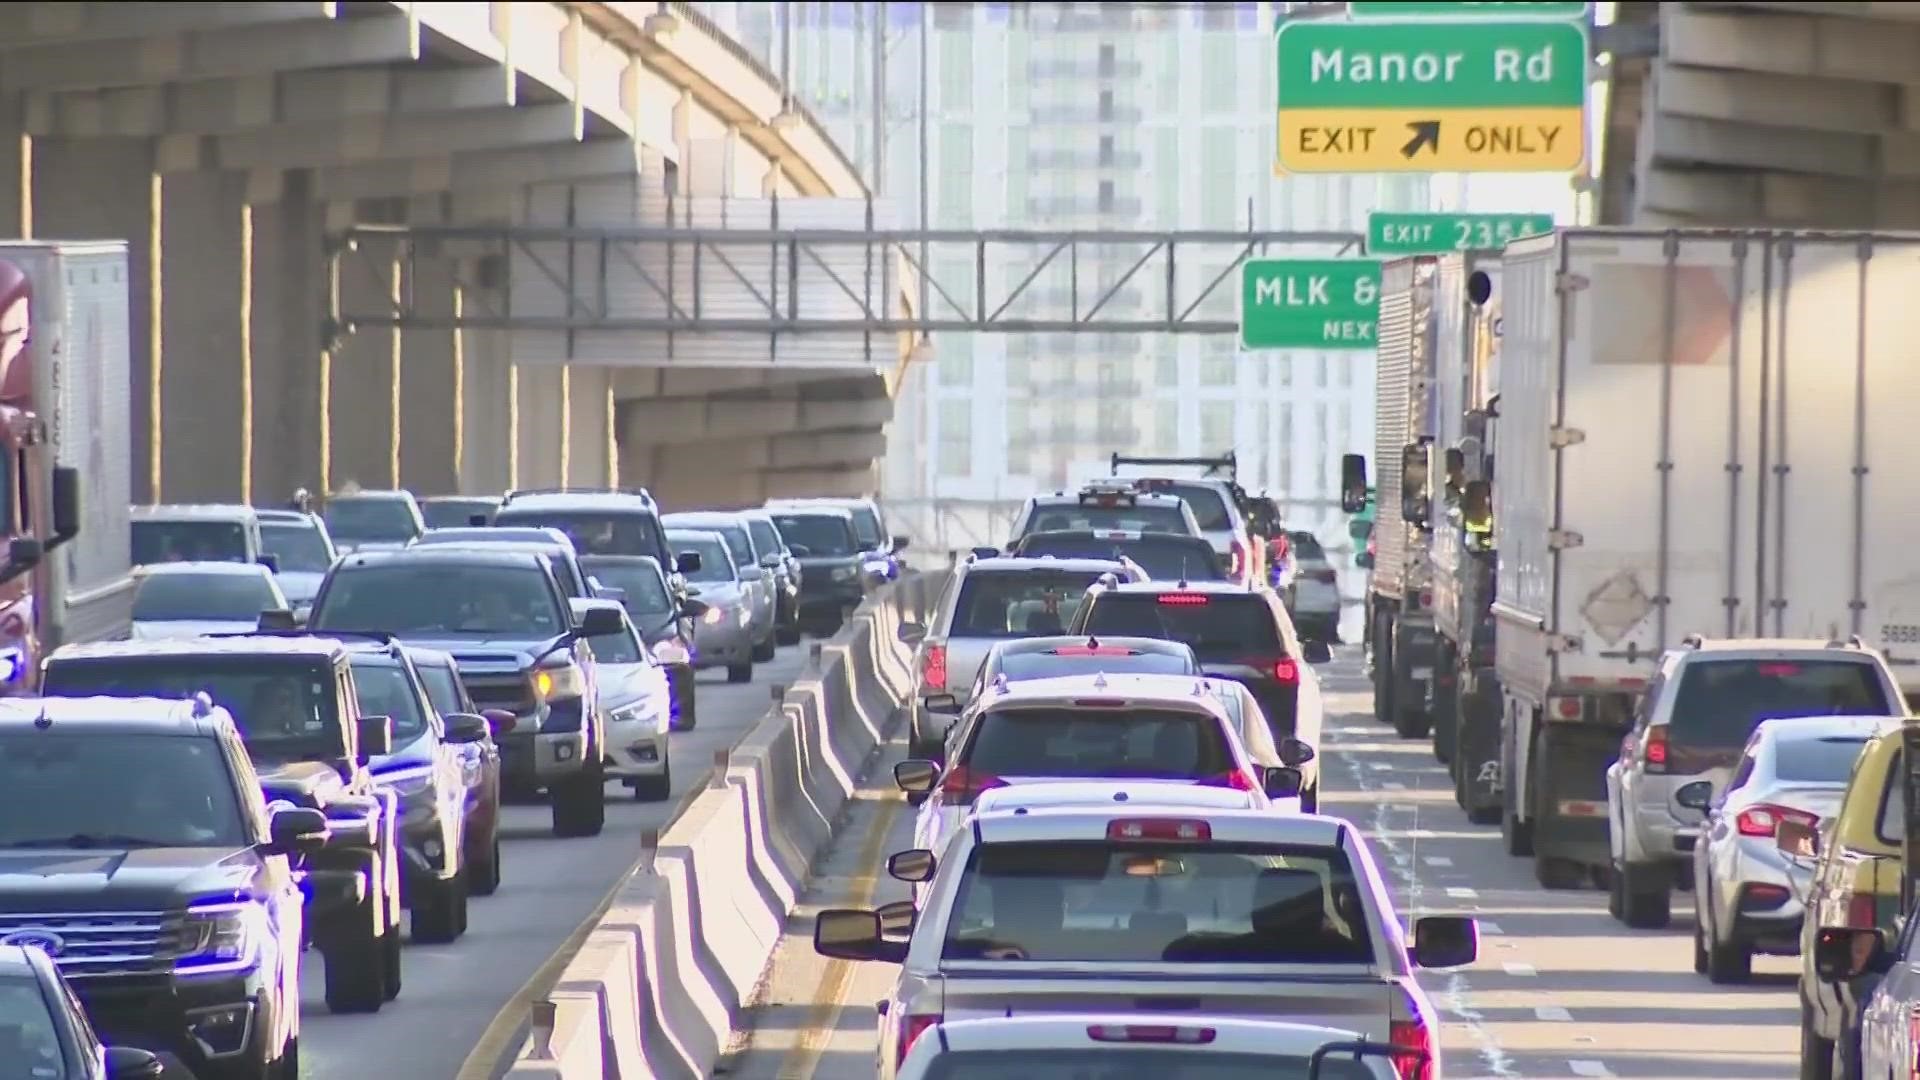 The project aims to expand the highway through the heart of Downtown Austin, but some residents are concerned about the impact on the community